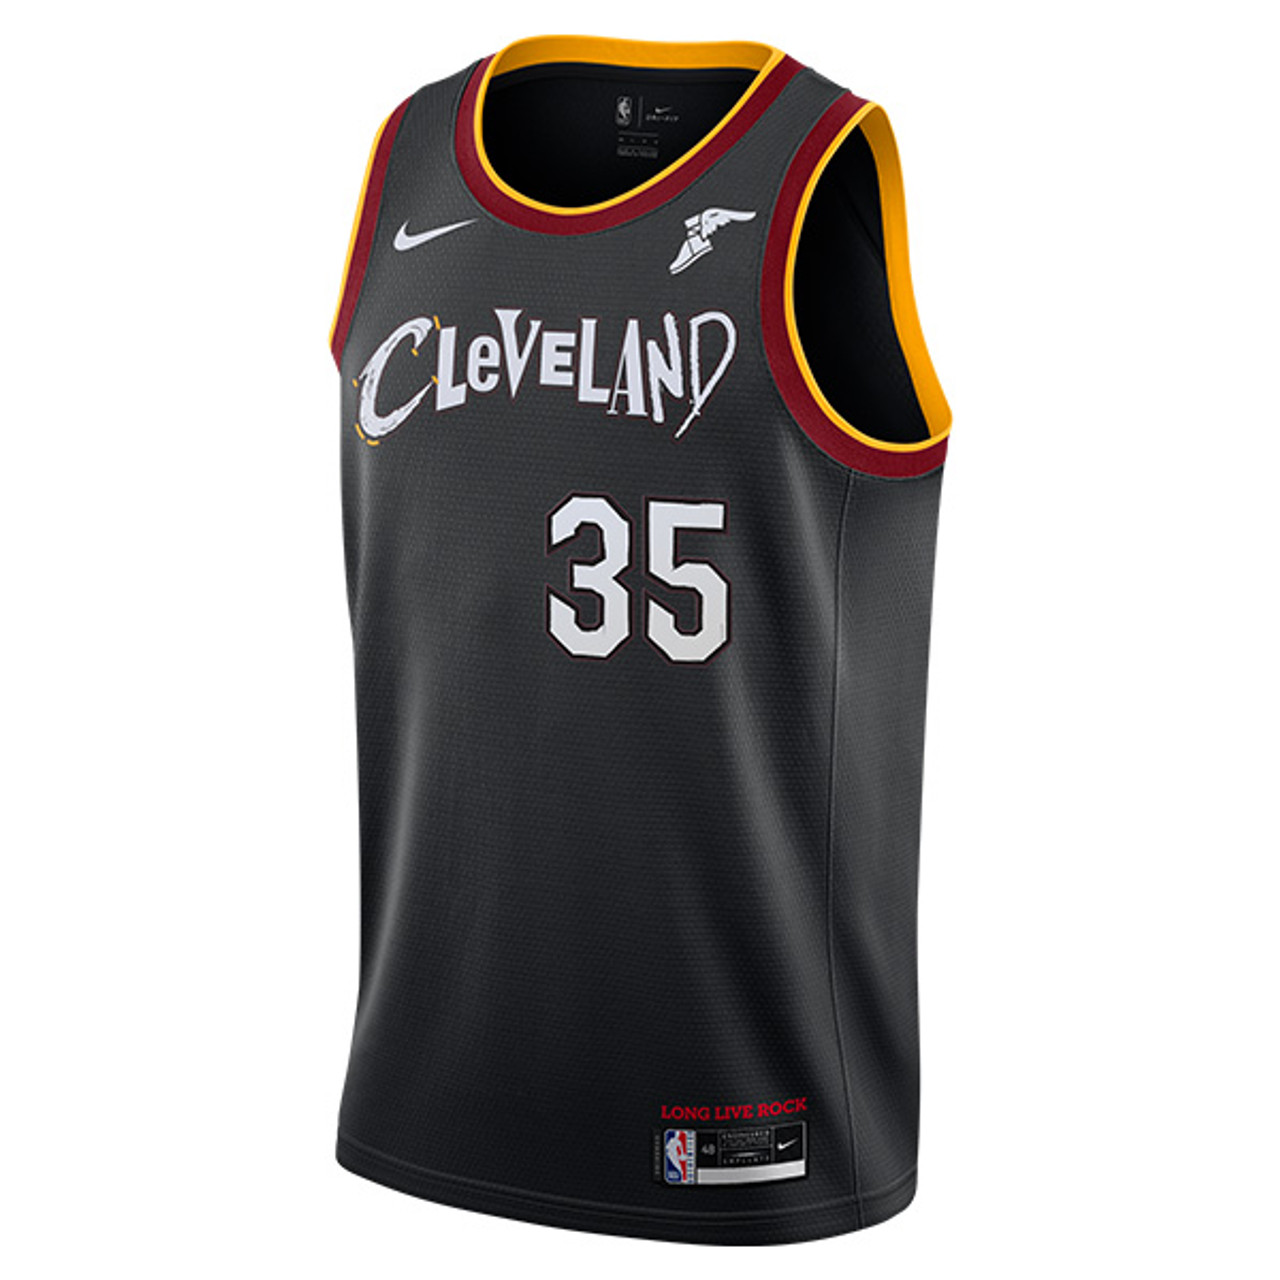 the city edition jersey